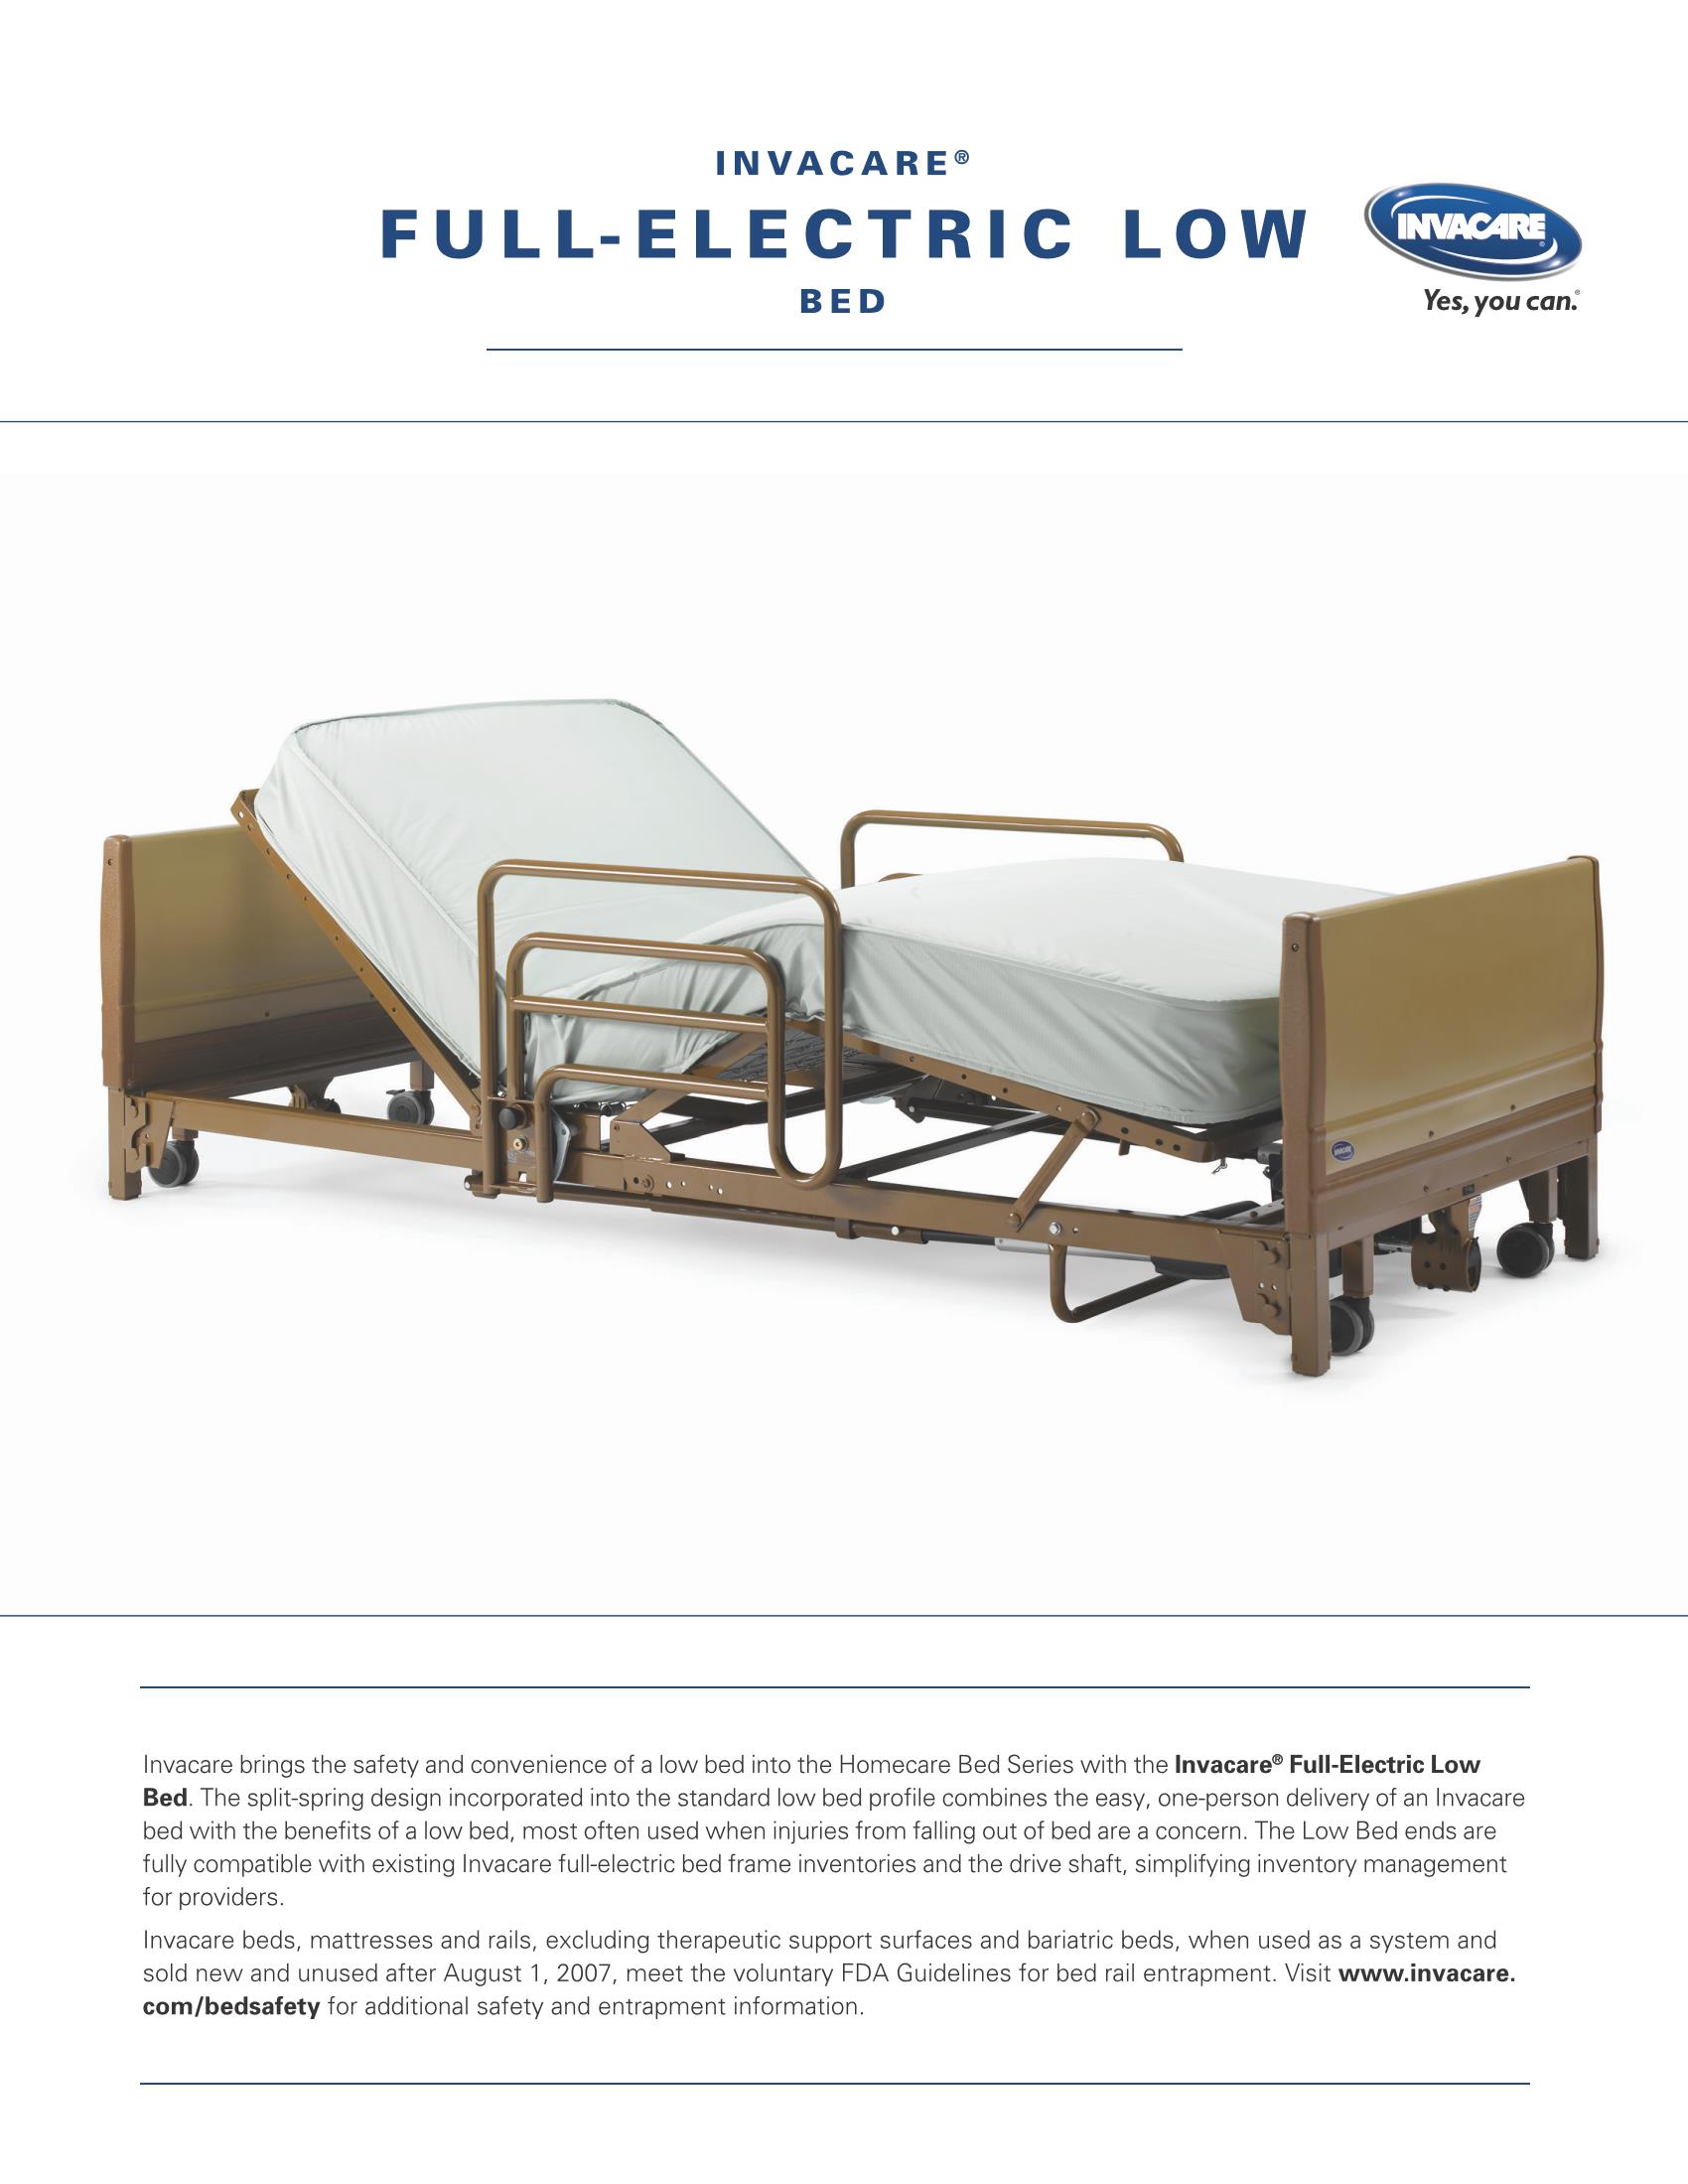 low fully electric hi-low 3 motor invacare hospital bed in Los Angeles features include high-low 